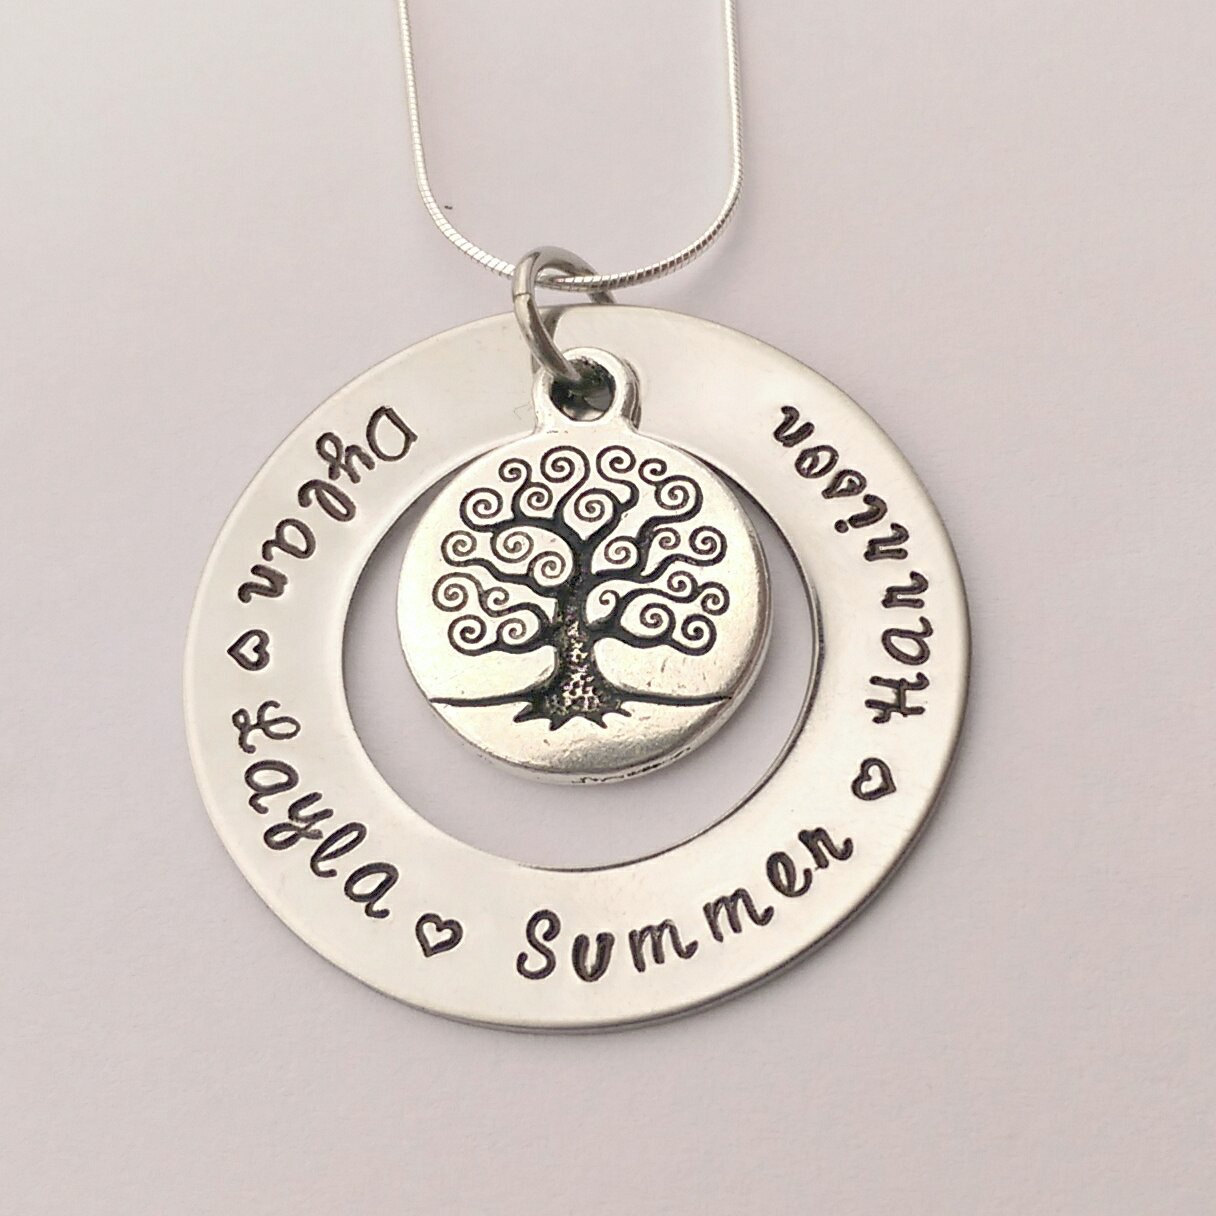 Personalized family tree necklace Personalized gift for